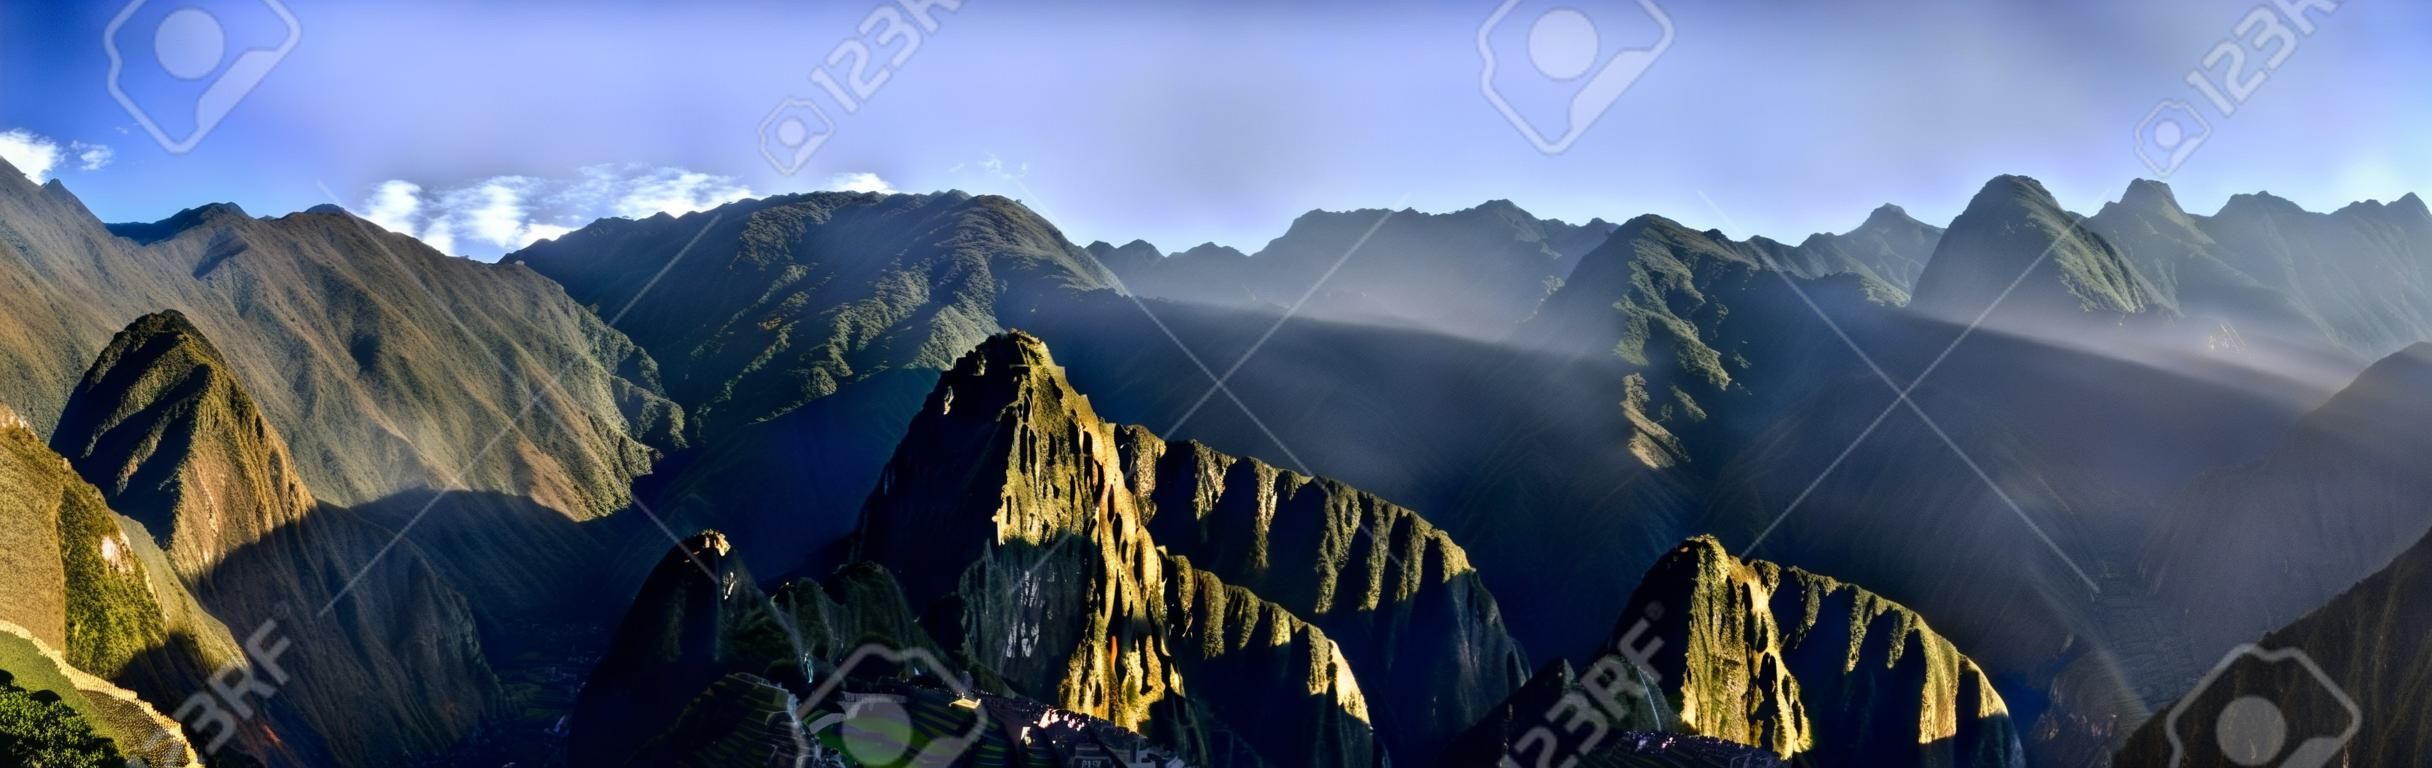 HDR Panorama of Sunrise over the Ruins Machu Picchu - Sacred city of the Incas